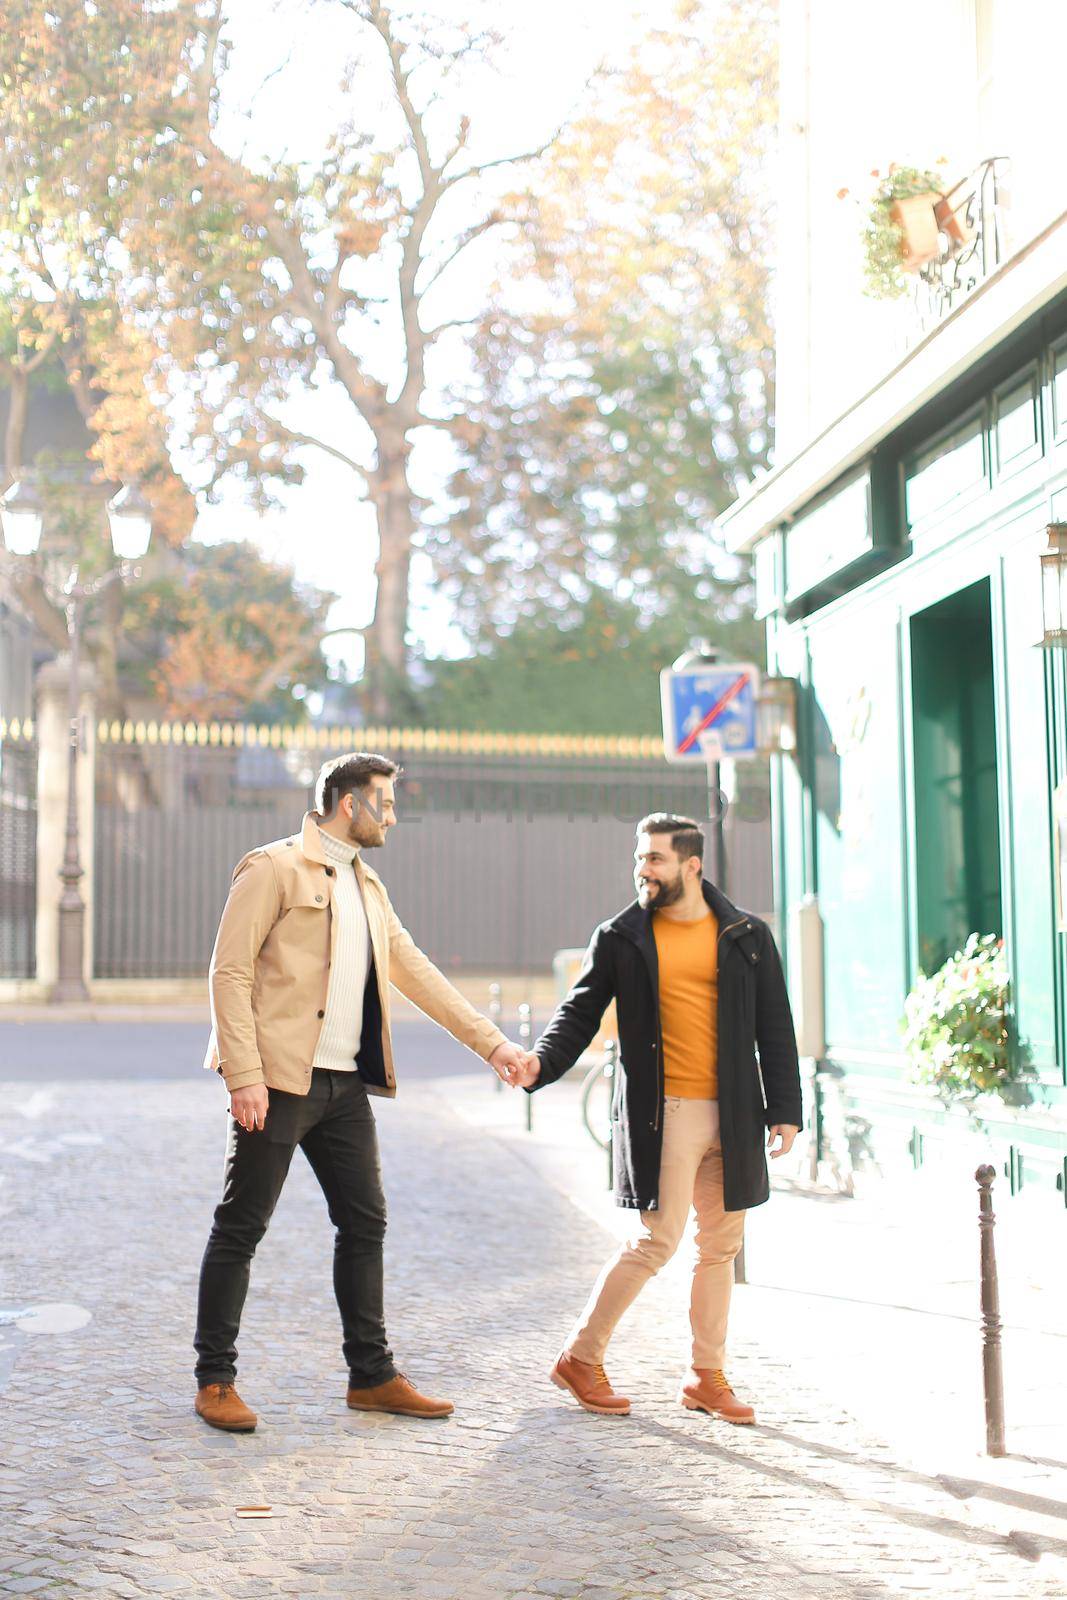 Gays strolling and holding hands in city. Concept of same sex couple and lgbt.